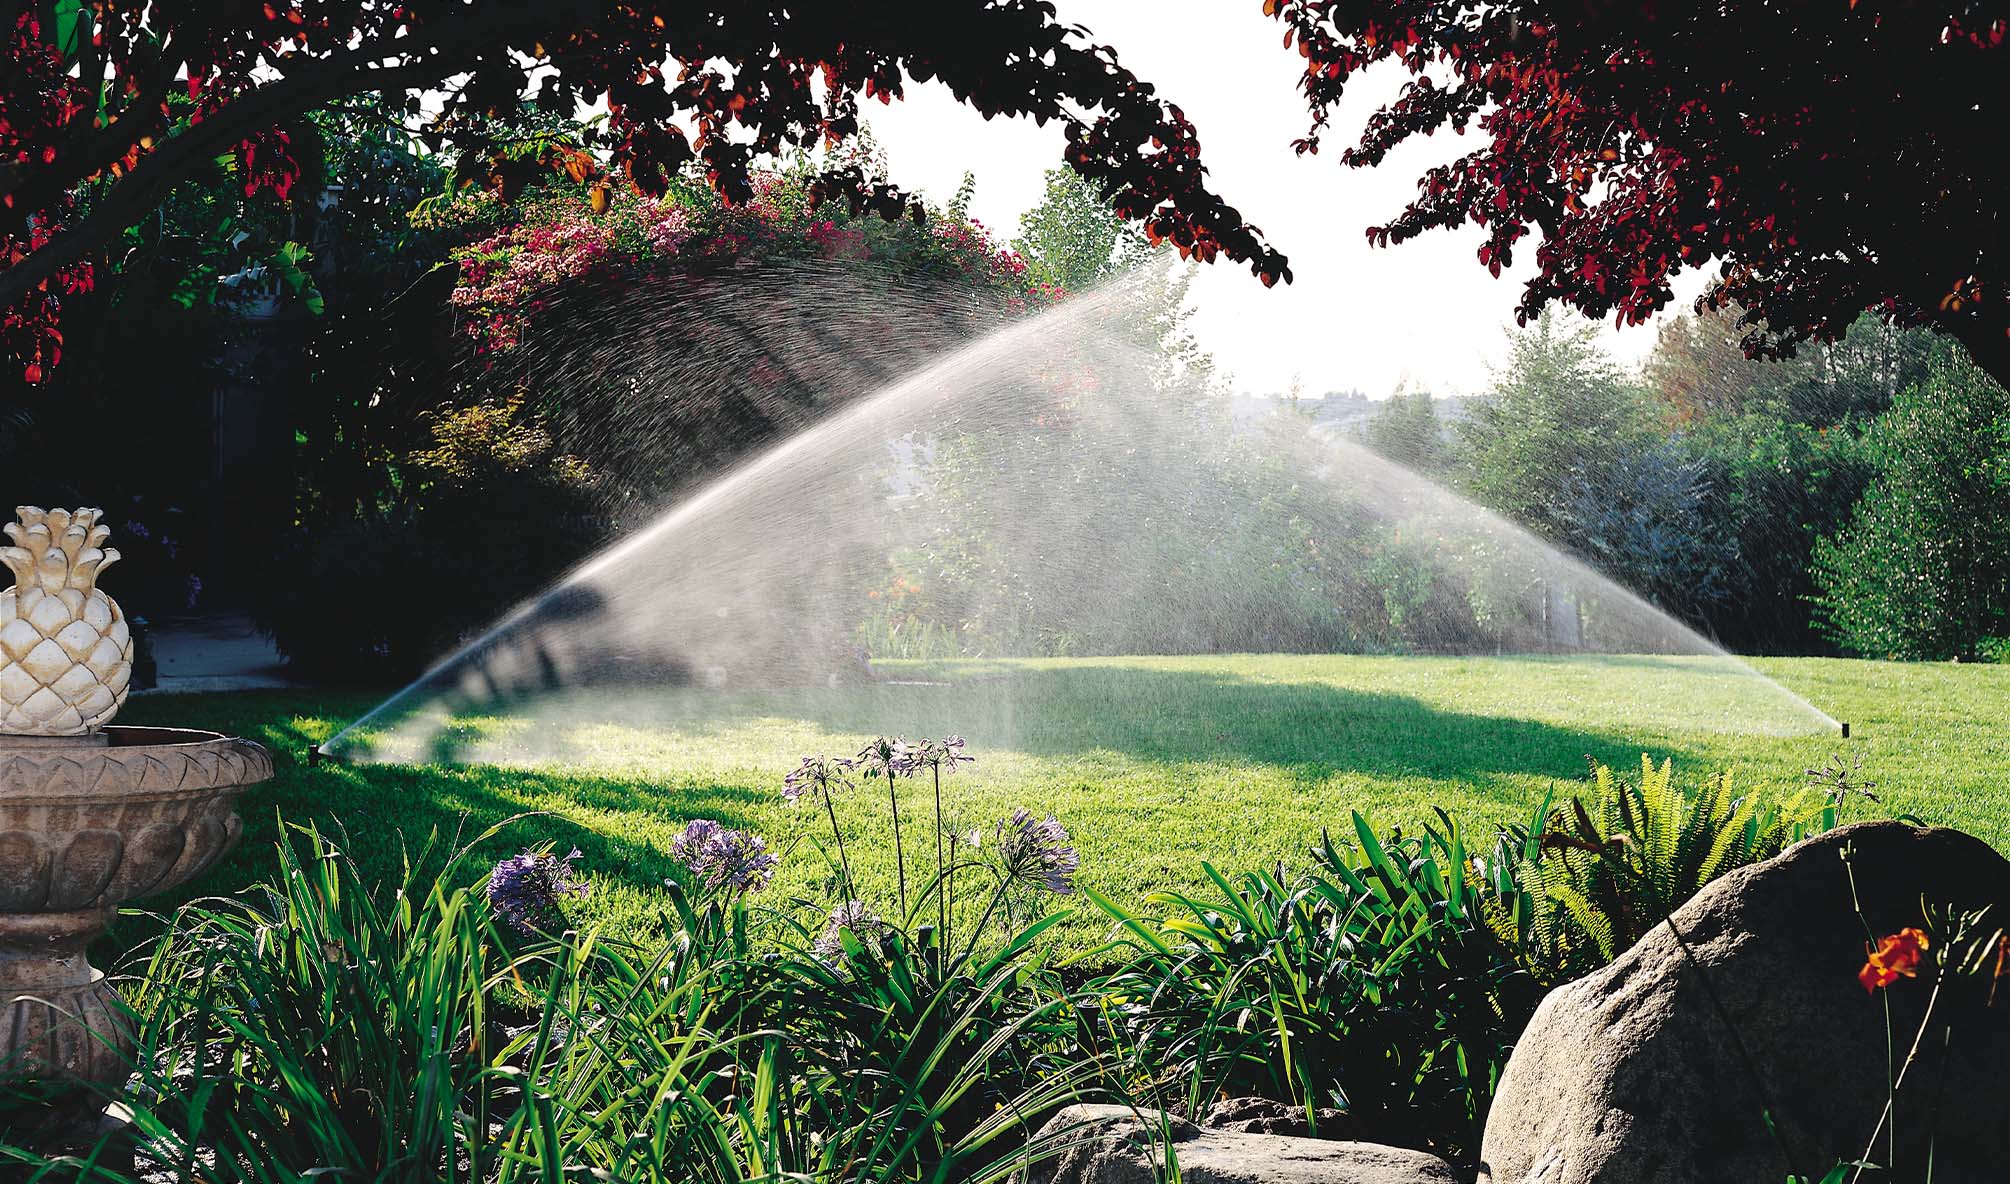 Irrigation Sprinklers Set To On In A Yard With A Garden